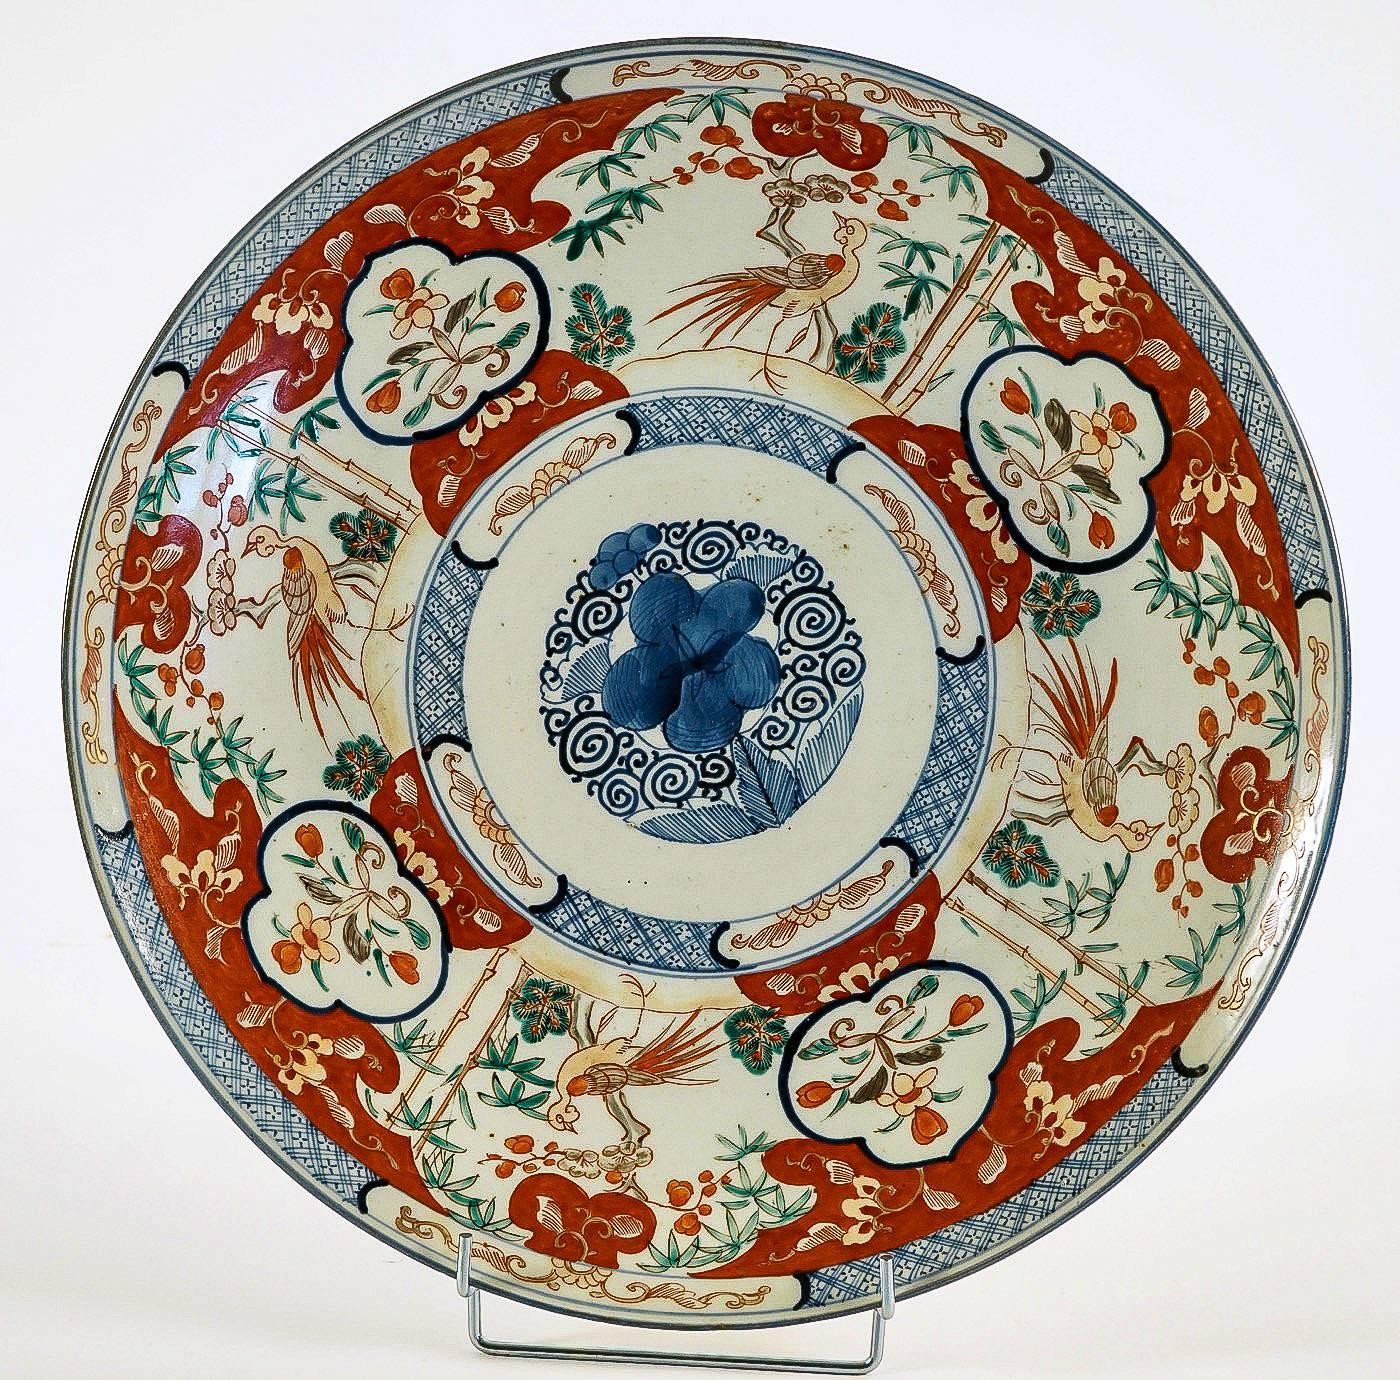 A magnificent polychrome Chinese porcelain plate, hand-painted in a red, depicting birds all around the center.

Beautiful Chinese work, mid-19th-century, circa 1850-1880.

Dimension: Diameter 18.50 In.

Fine original condition.
    